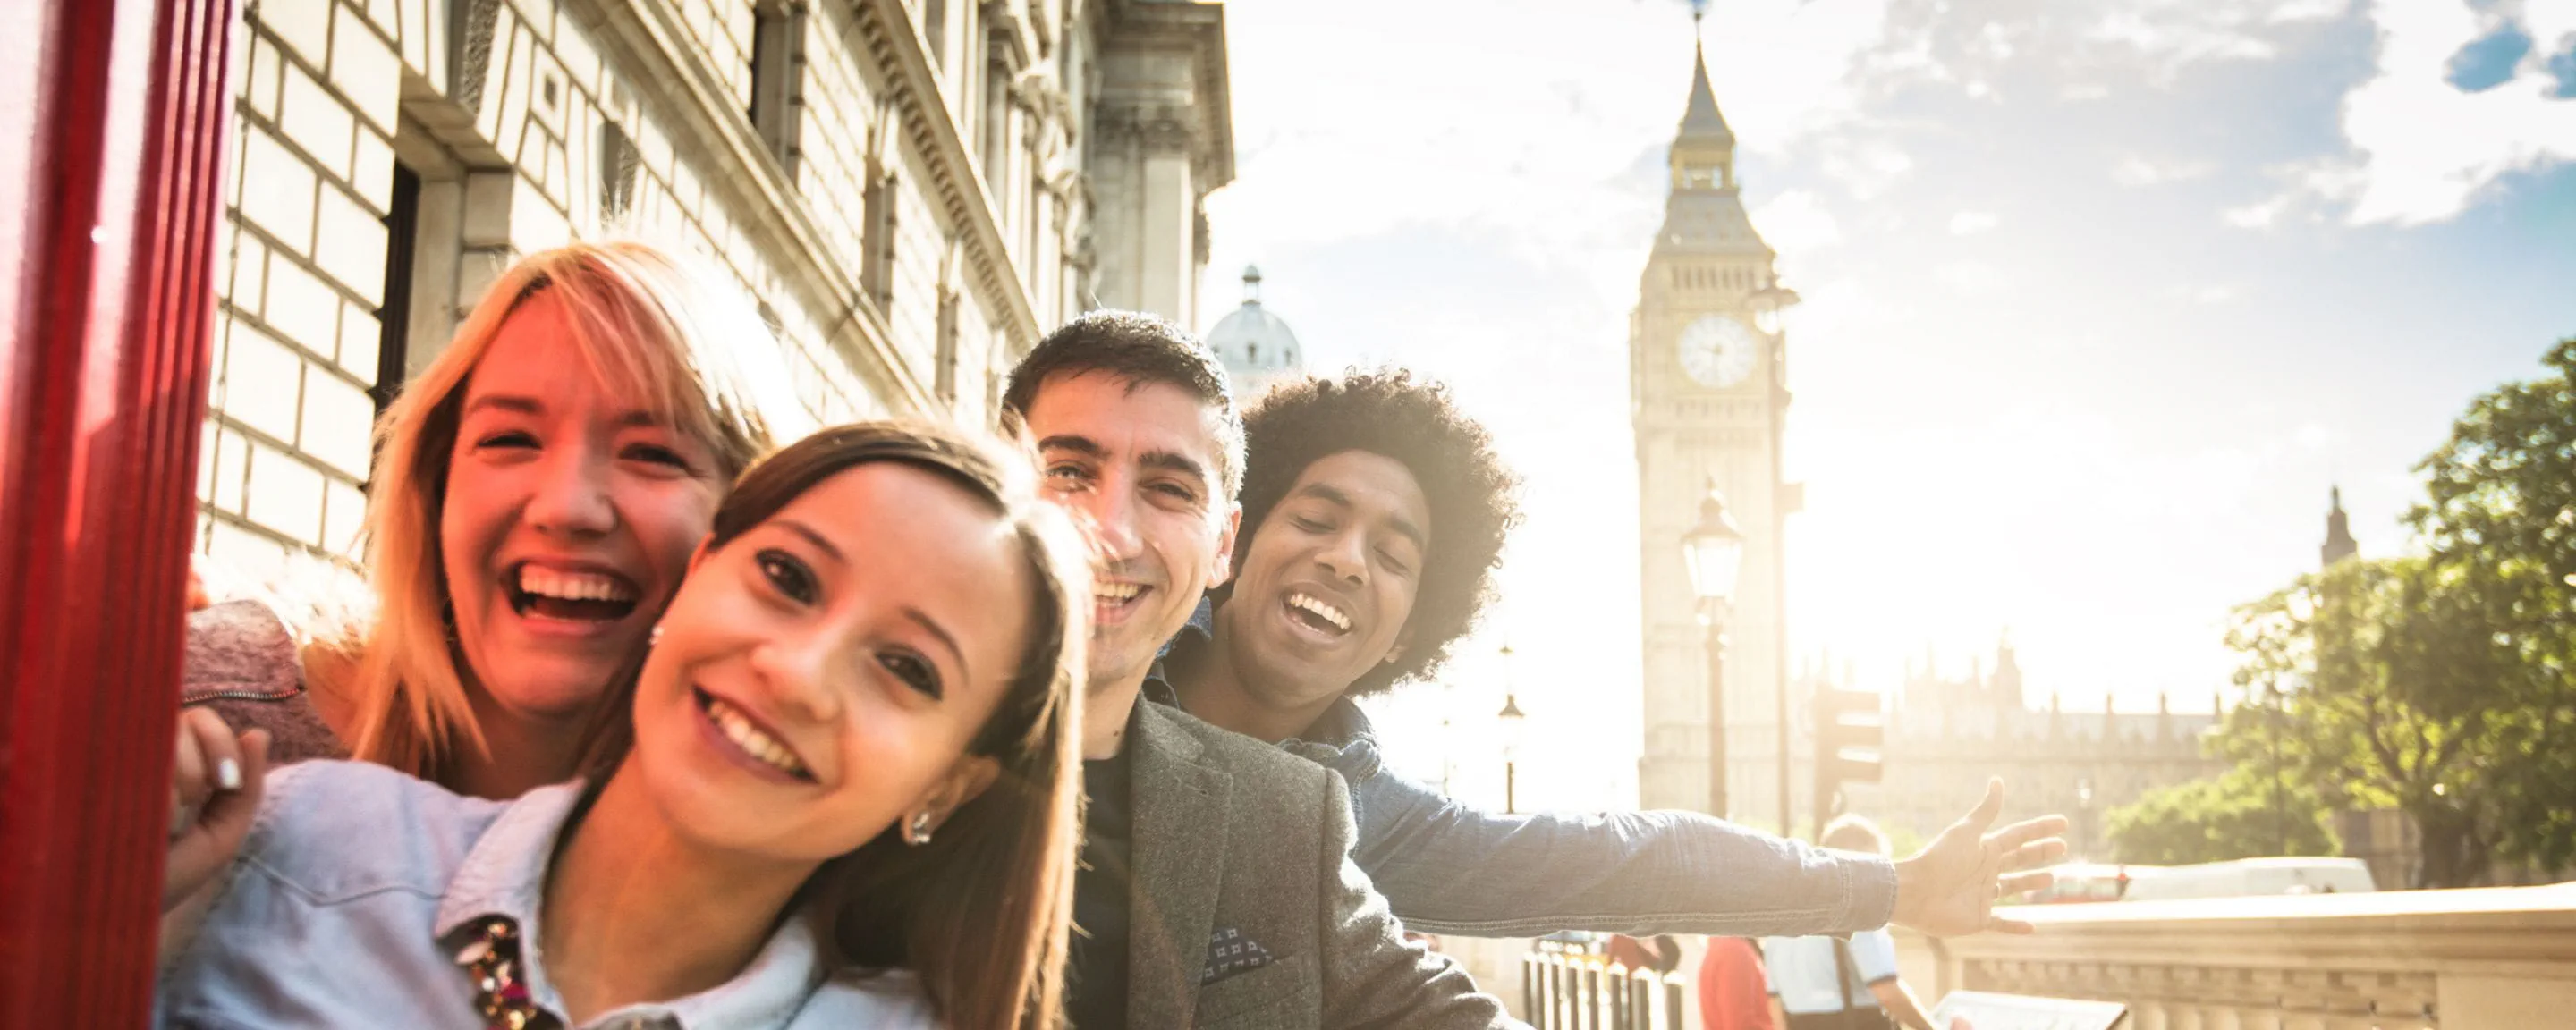 a group of friends posing for a photo in front of Big Ben